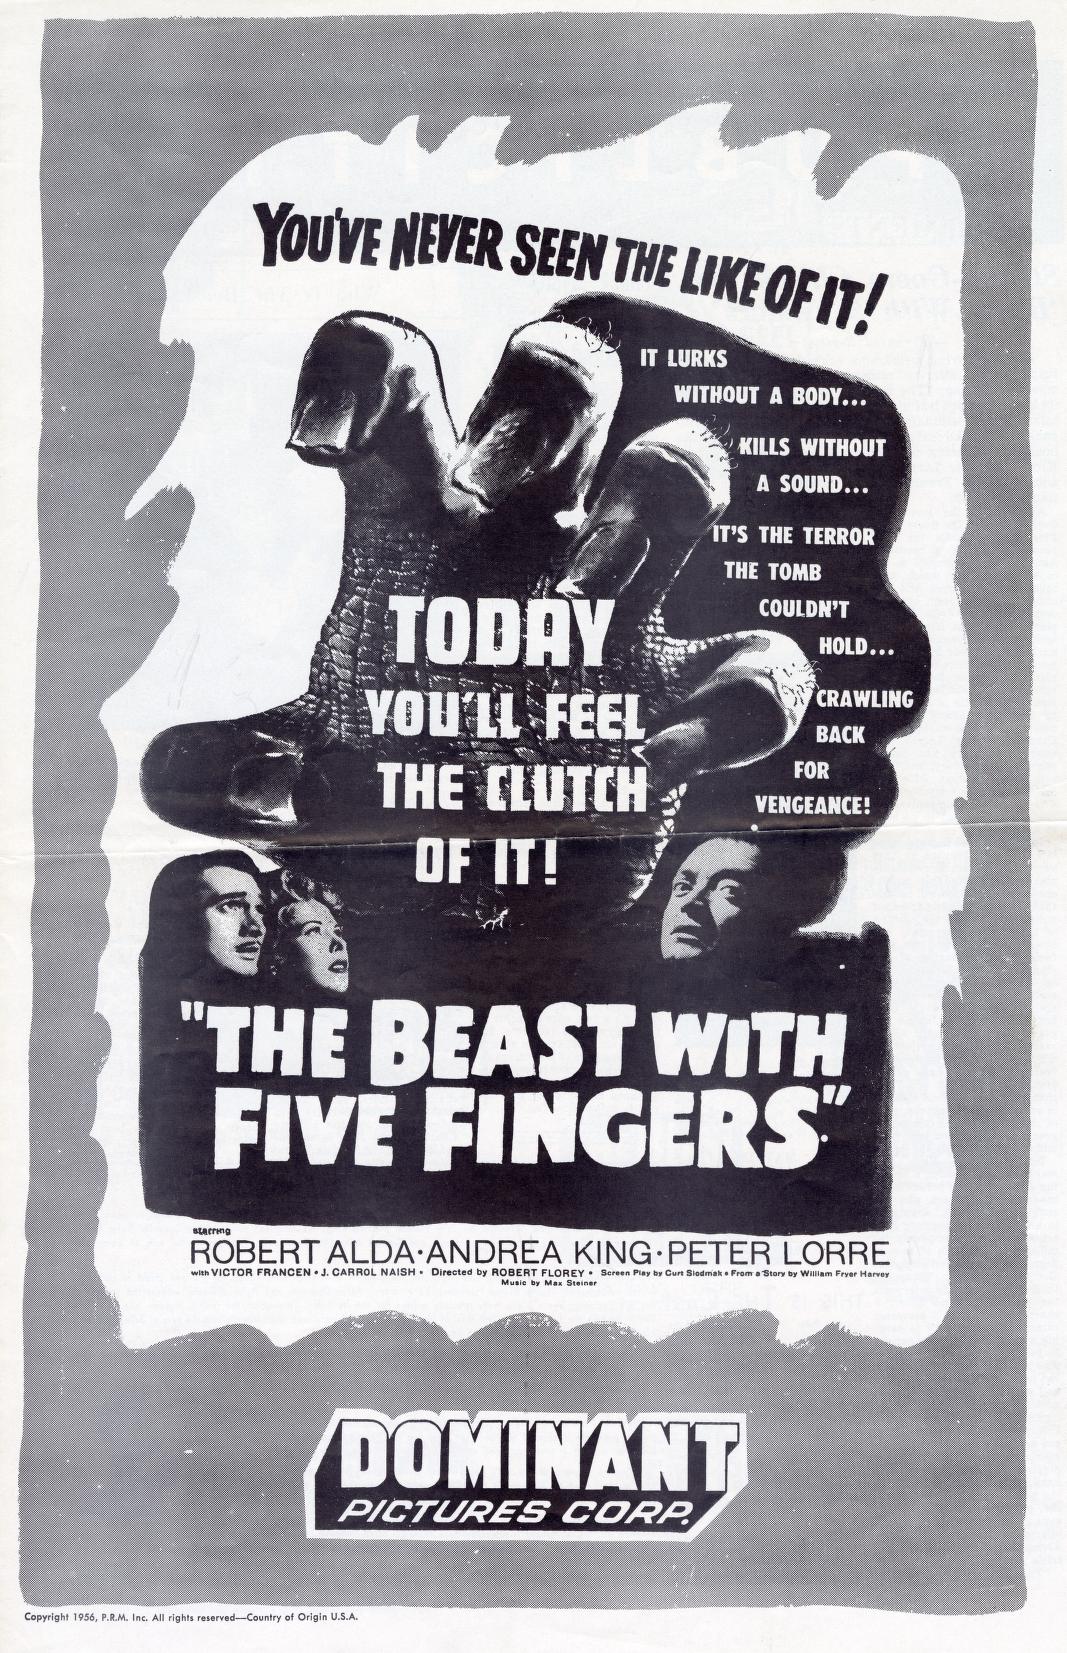 The Beast with Five Fingers (Warner Bros.)